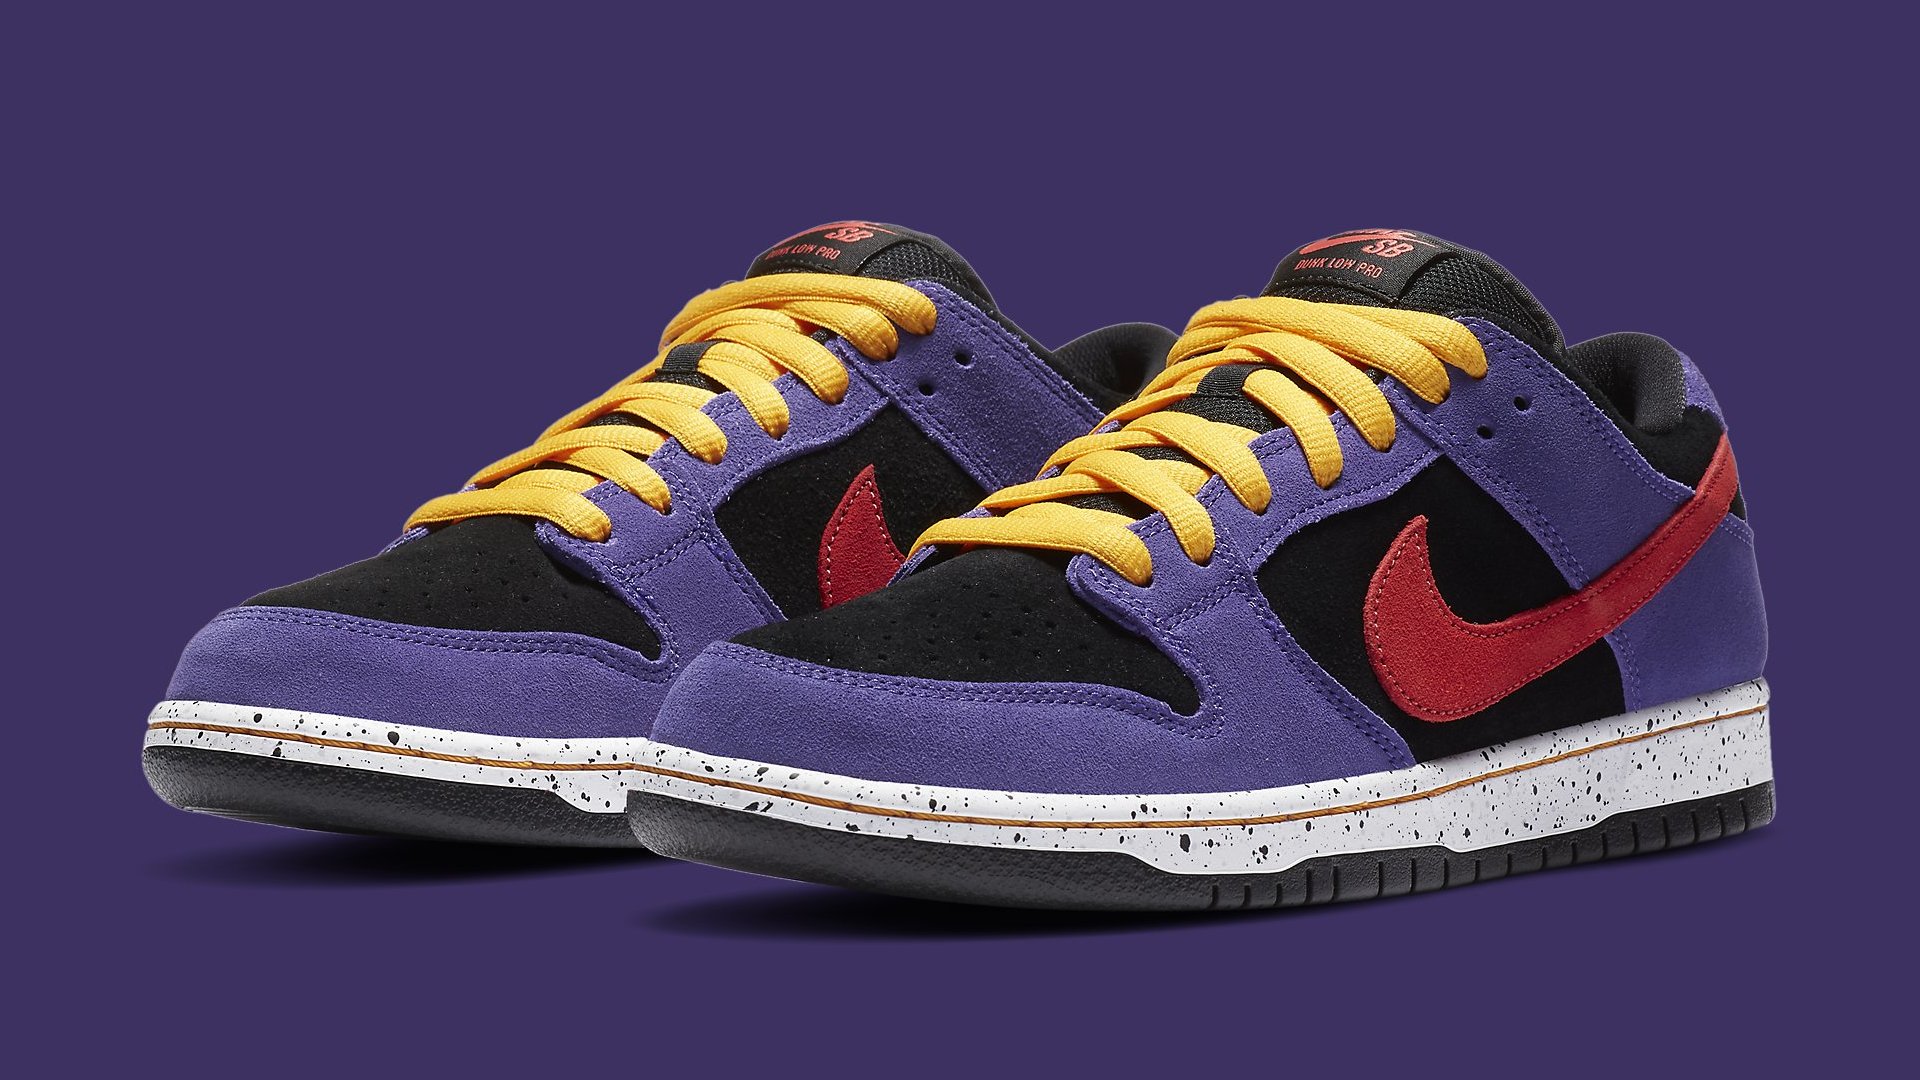 Throwback ACG Sneaker Inspires This SB Dunk Low | Complex